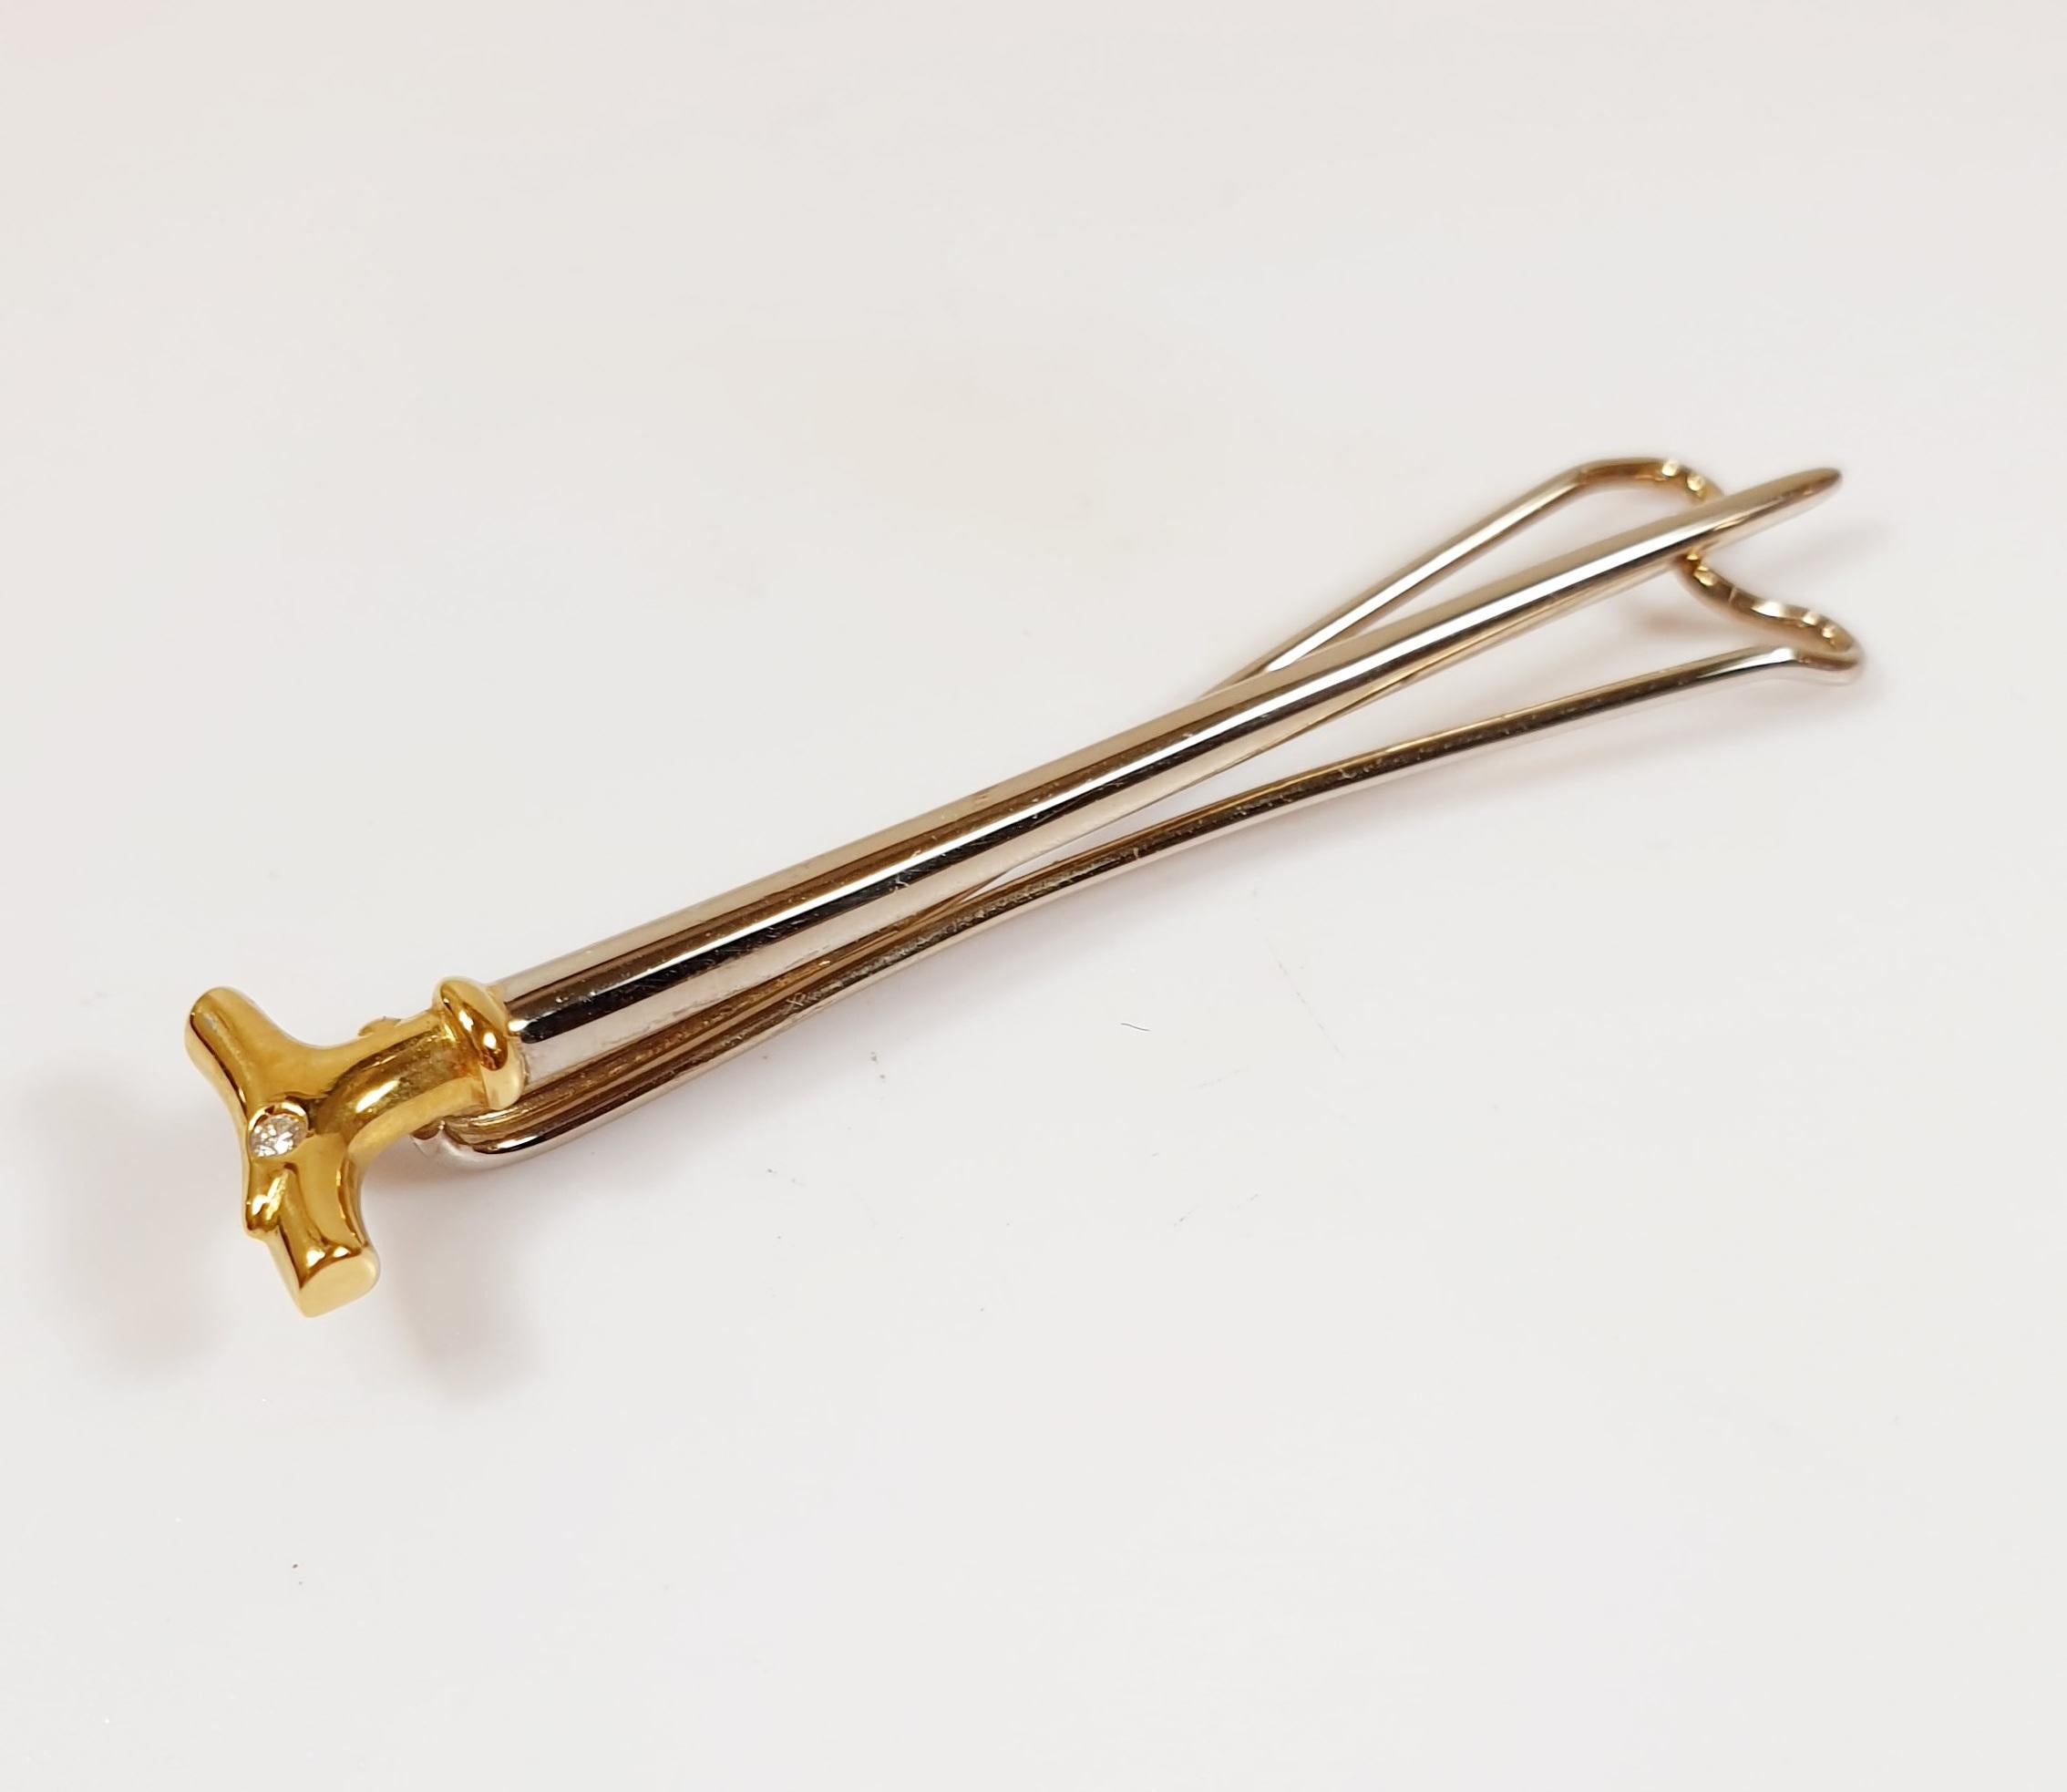  Vintage Cane-shaped Tie Clip in White and Yellow Gold whith a diamond
Measures 5,5 cm/   2,16 inches
Weight 3,7 grams

READY TO SHIP
*Shipment of this piece is not affected by COVID-19. Orders welcome!

PRADERA is a second generation of a family